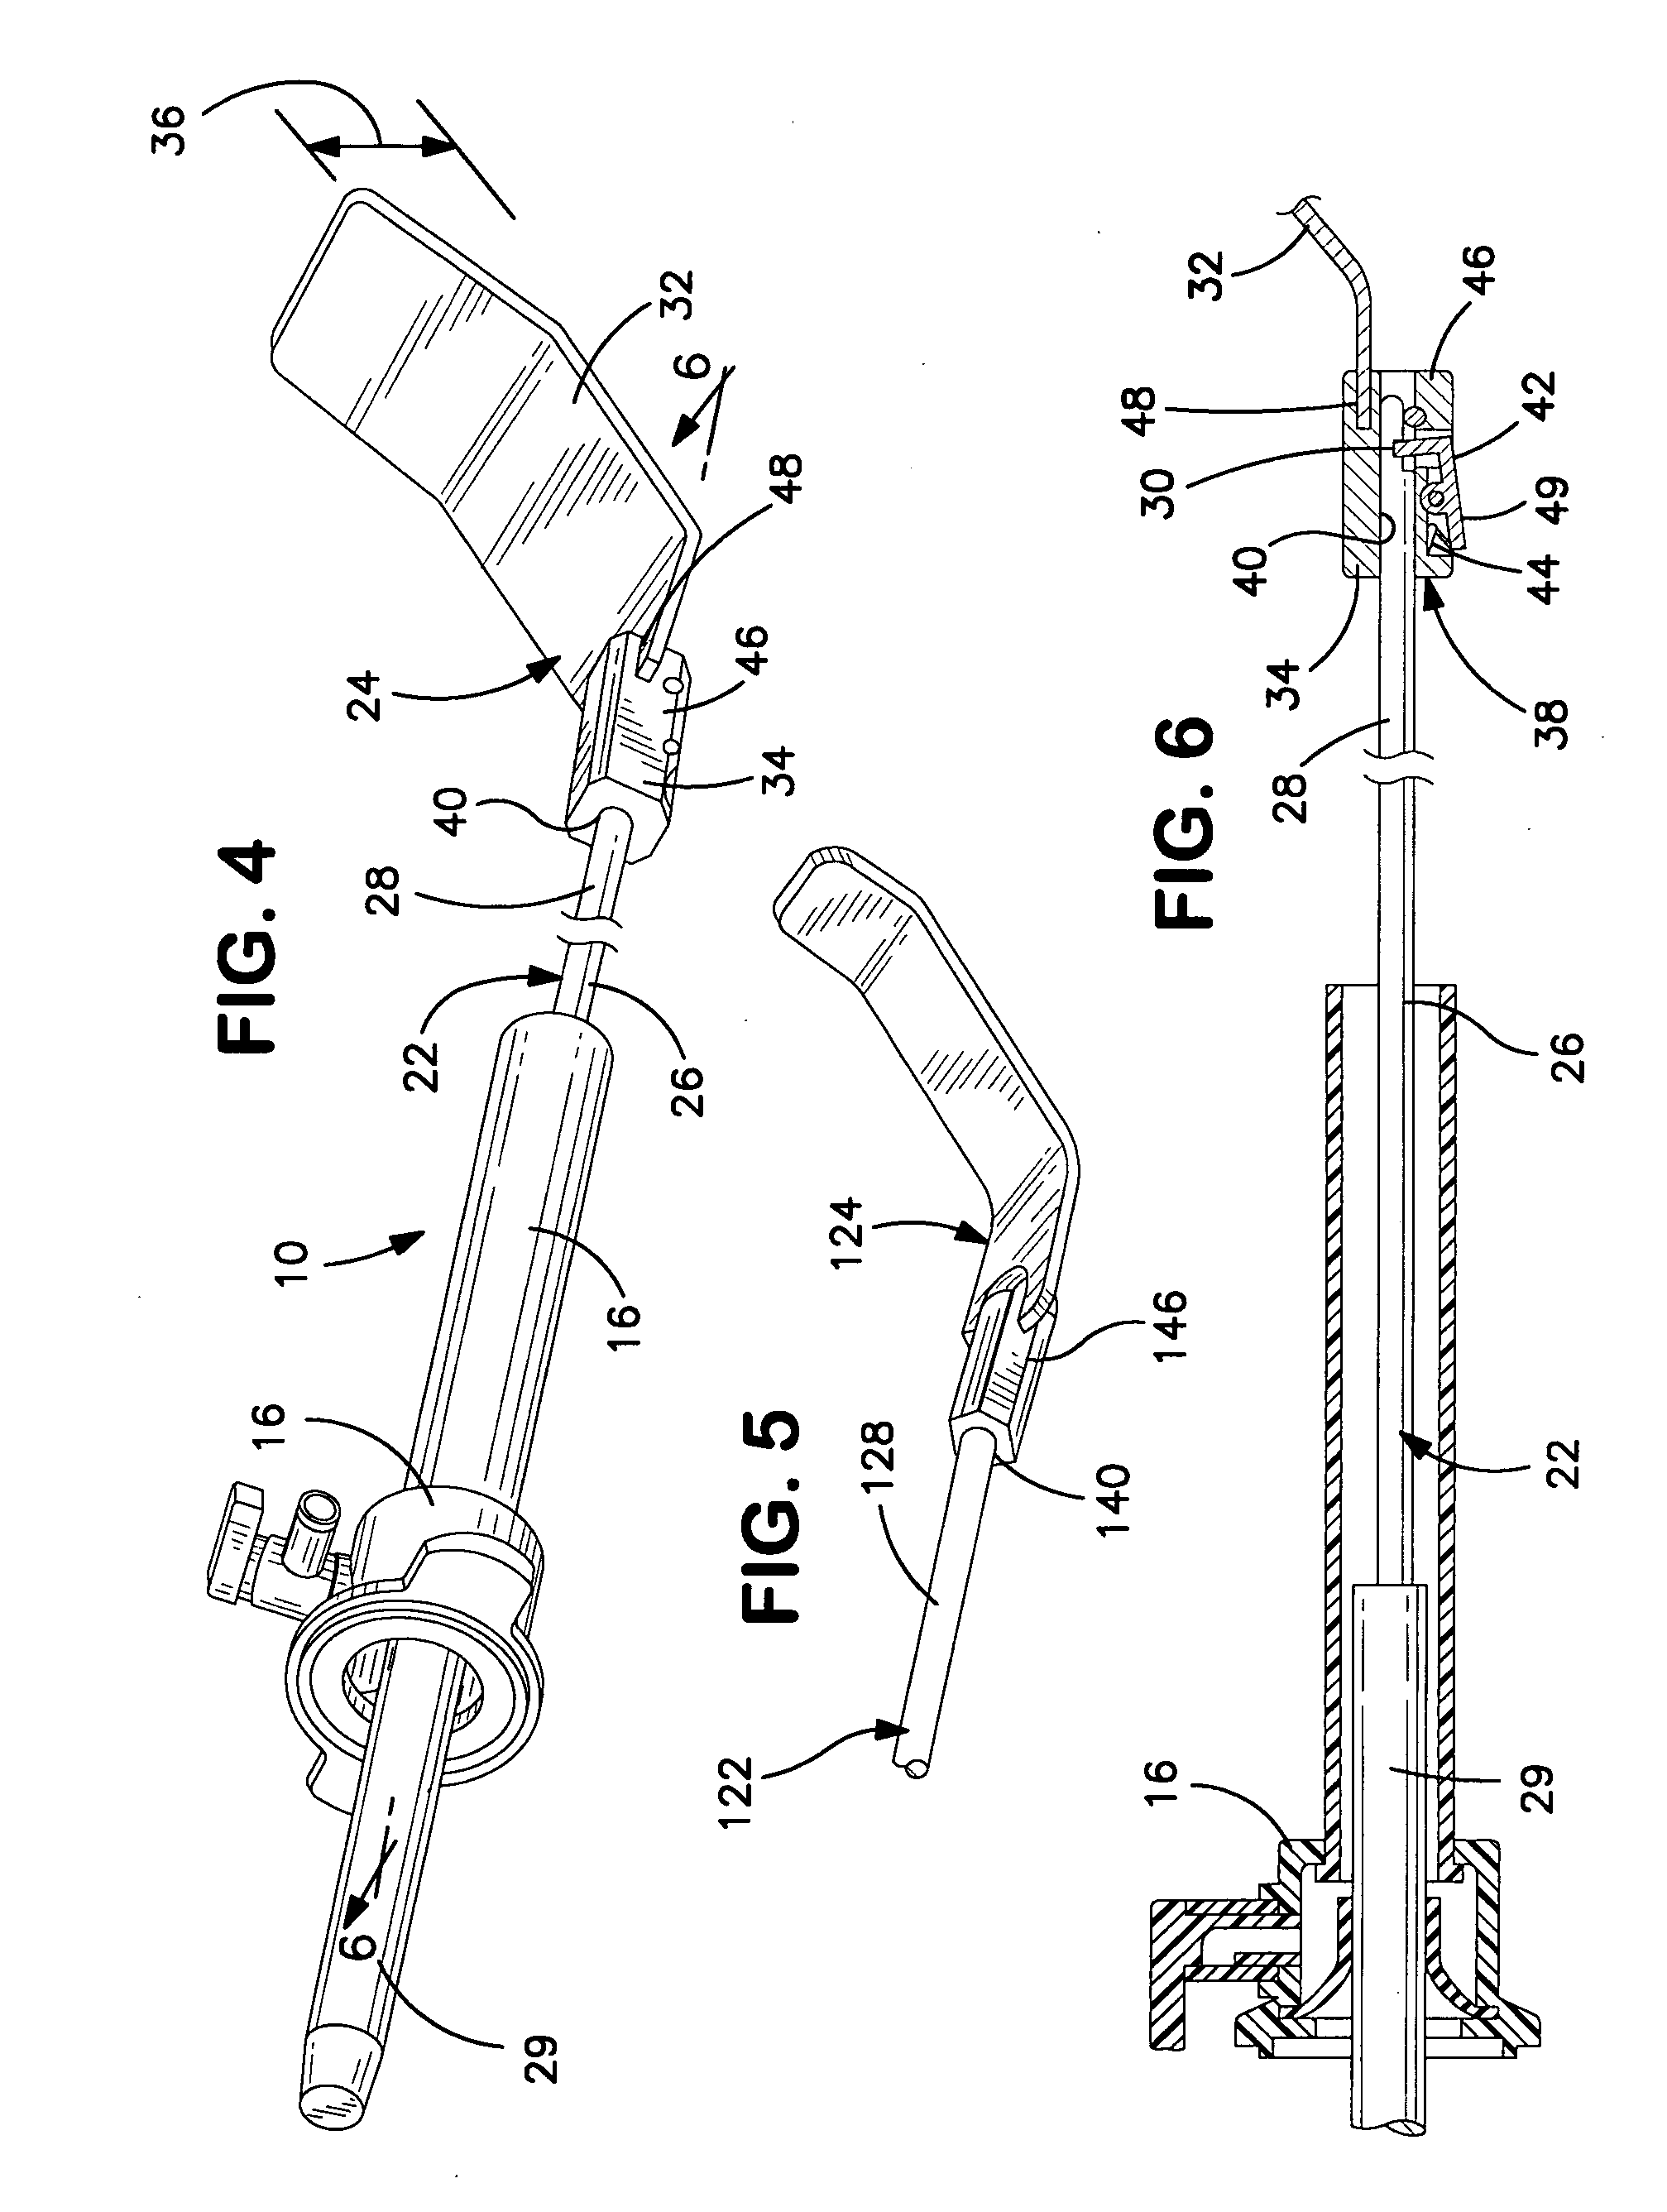 Retractor system for internal in-situ assembly during laparoscopic surgery